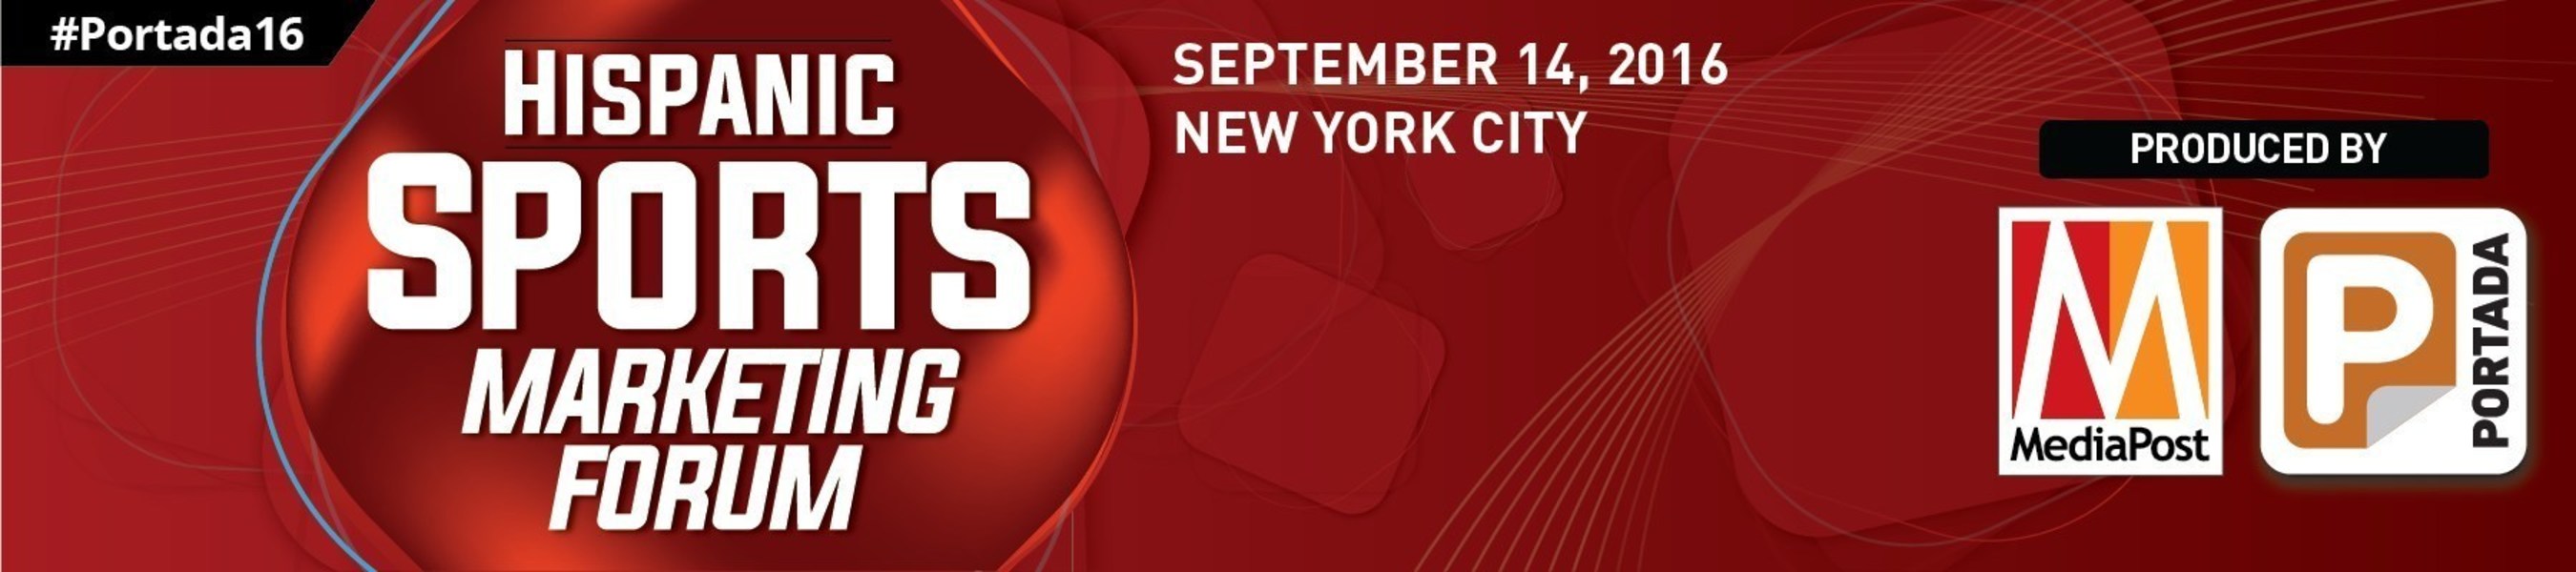 MediaPost and Portada are combining forces on September 14, in New York City to create a bigger and stronger Hispanic Sports Marketing Forum.Sponsors will benefit from MediaPost's unique reach among U.S. brand, agency and media execs as well as of  Portada's strong multicultural market penetration.